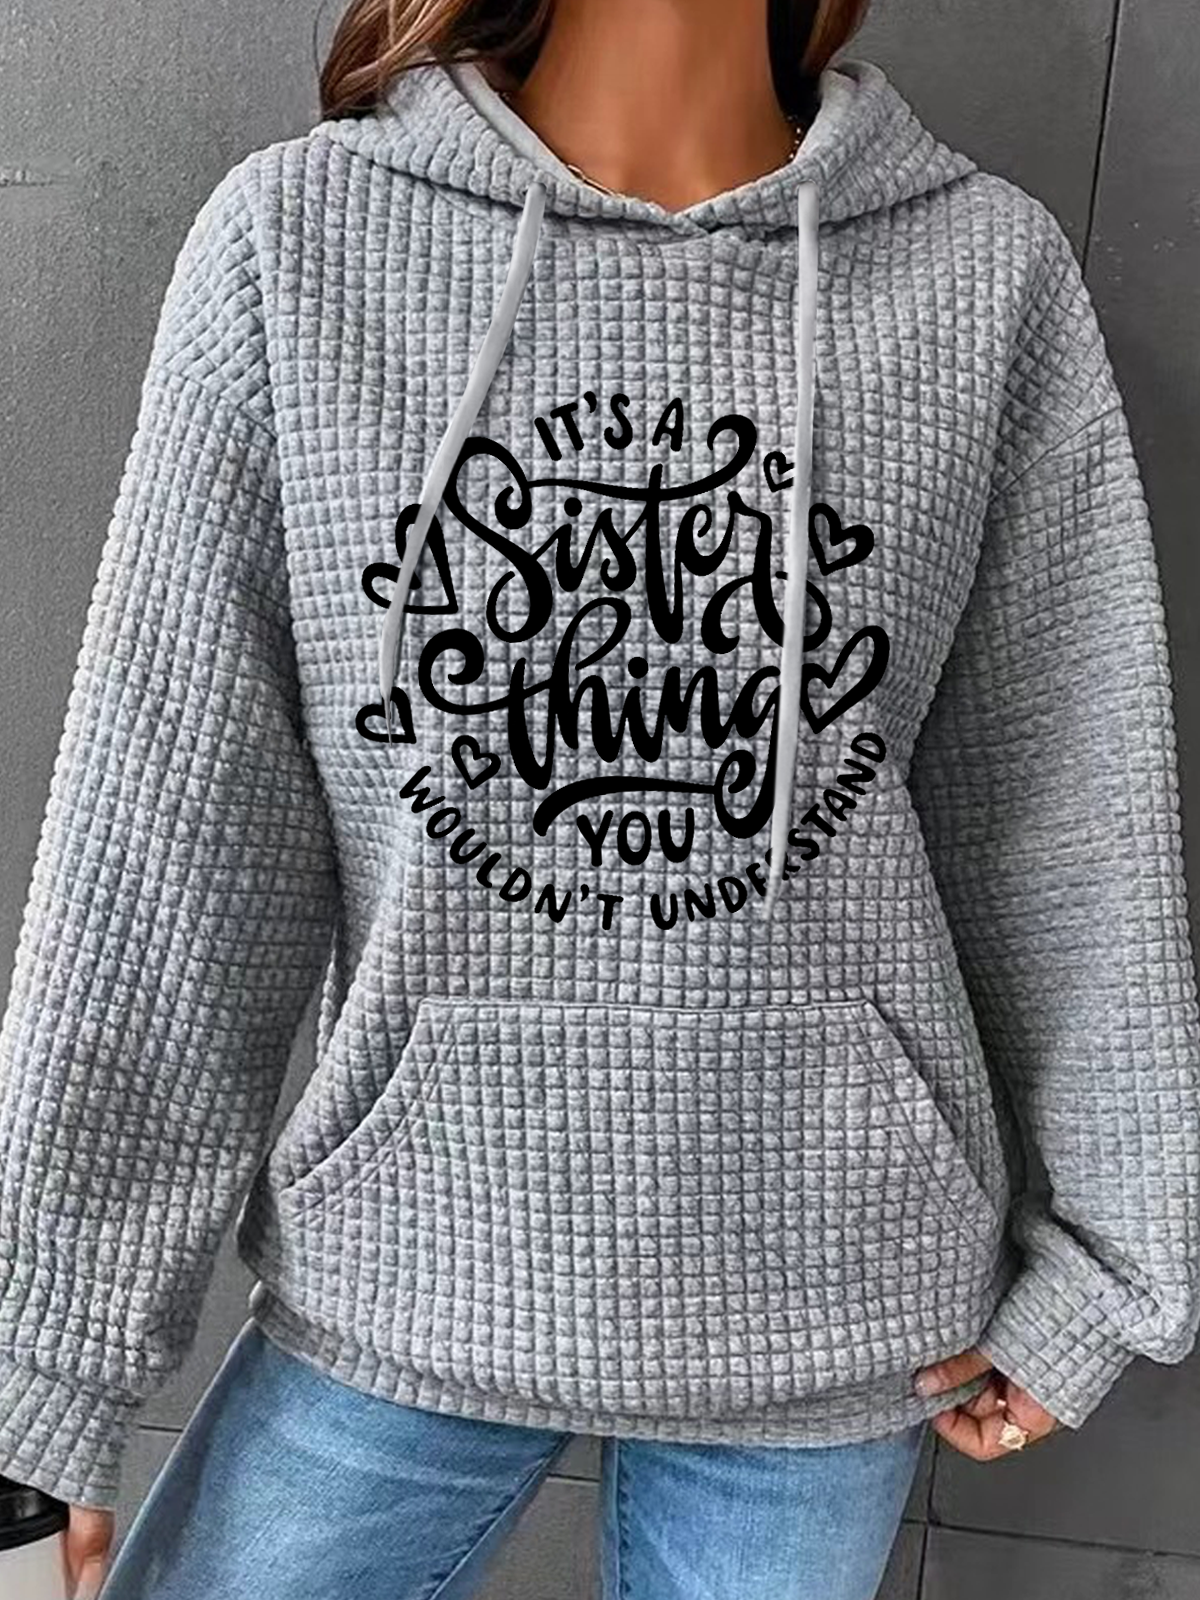 It's A Sister Thing You Wouldn't Understand Casual Loose Hoodie